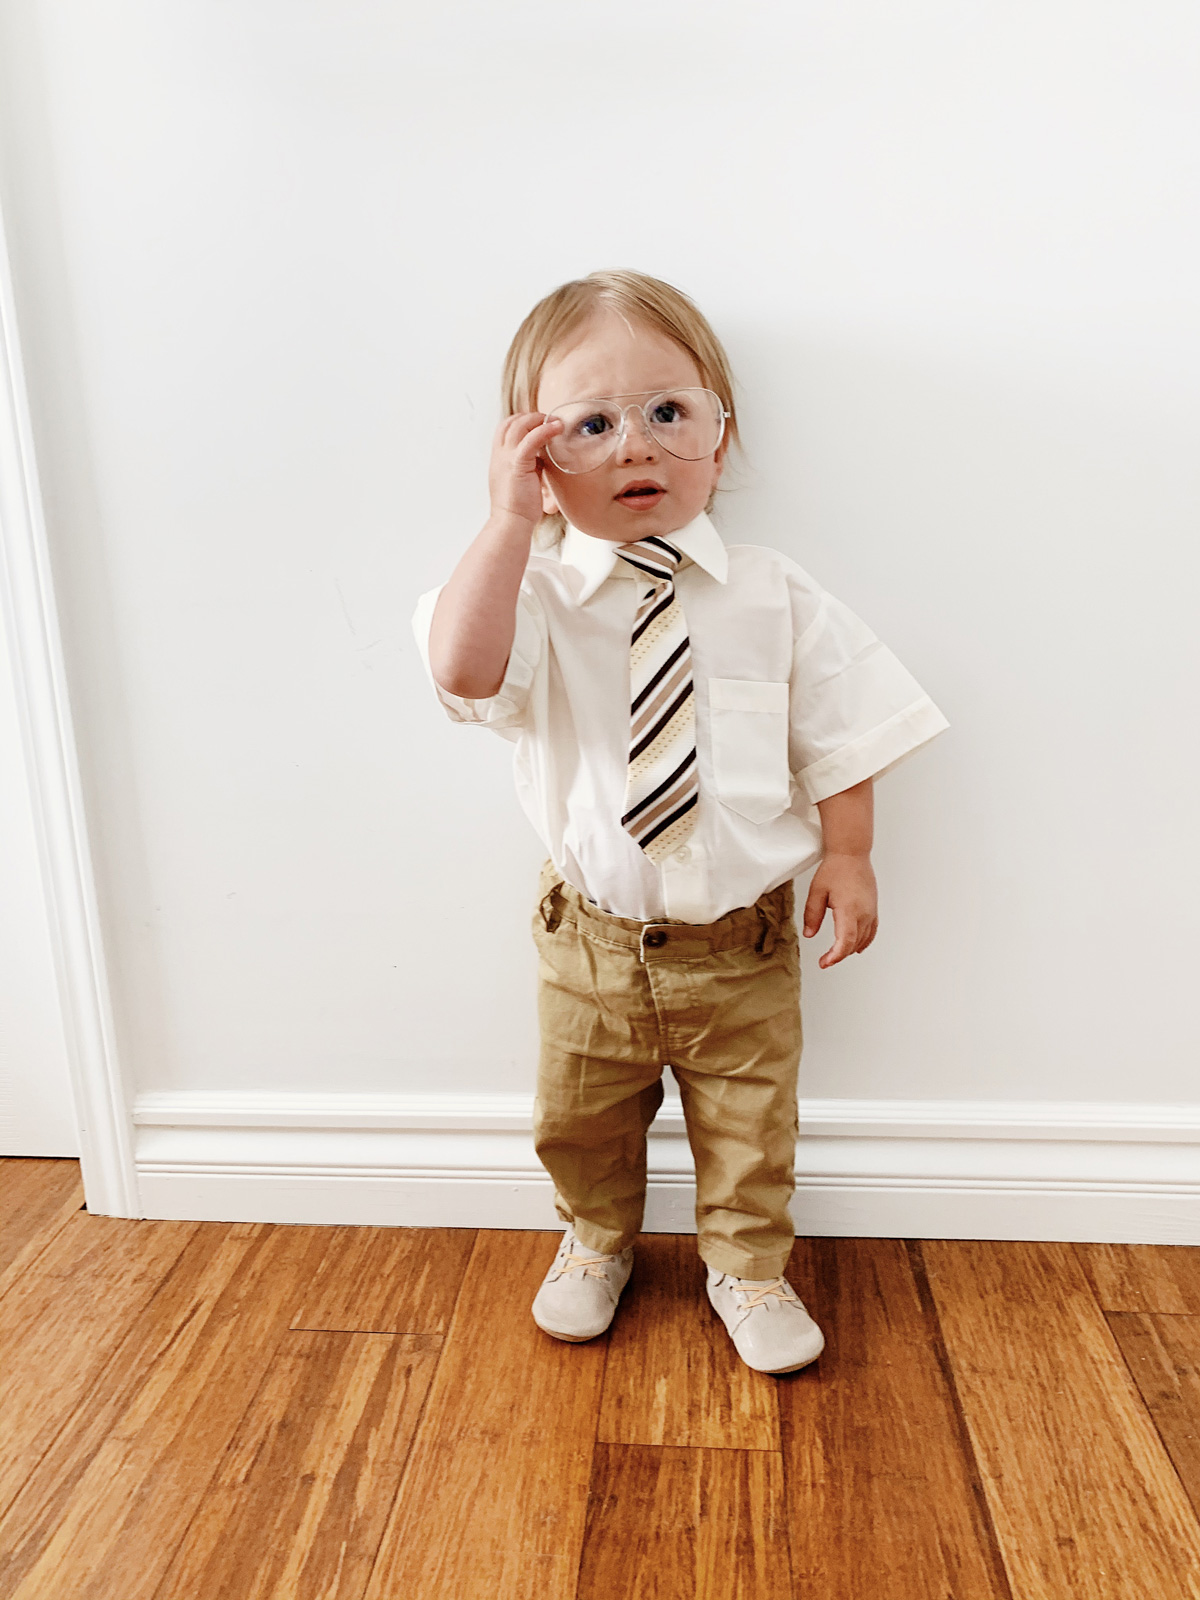 Kimberly Lapides of eatsleepwear sharing a DIY Dwight Schrute from The Office Show Halloween costume featuring freshly picked, pippa and julie and amazon.